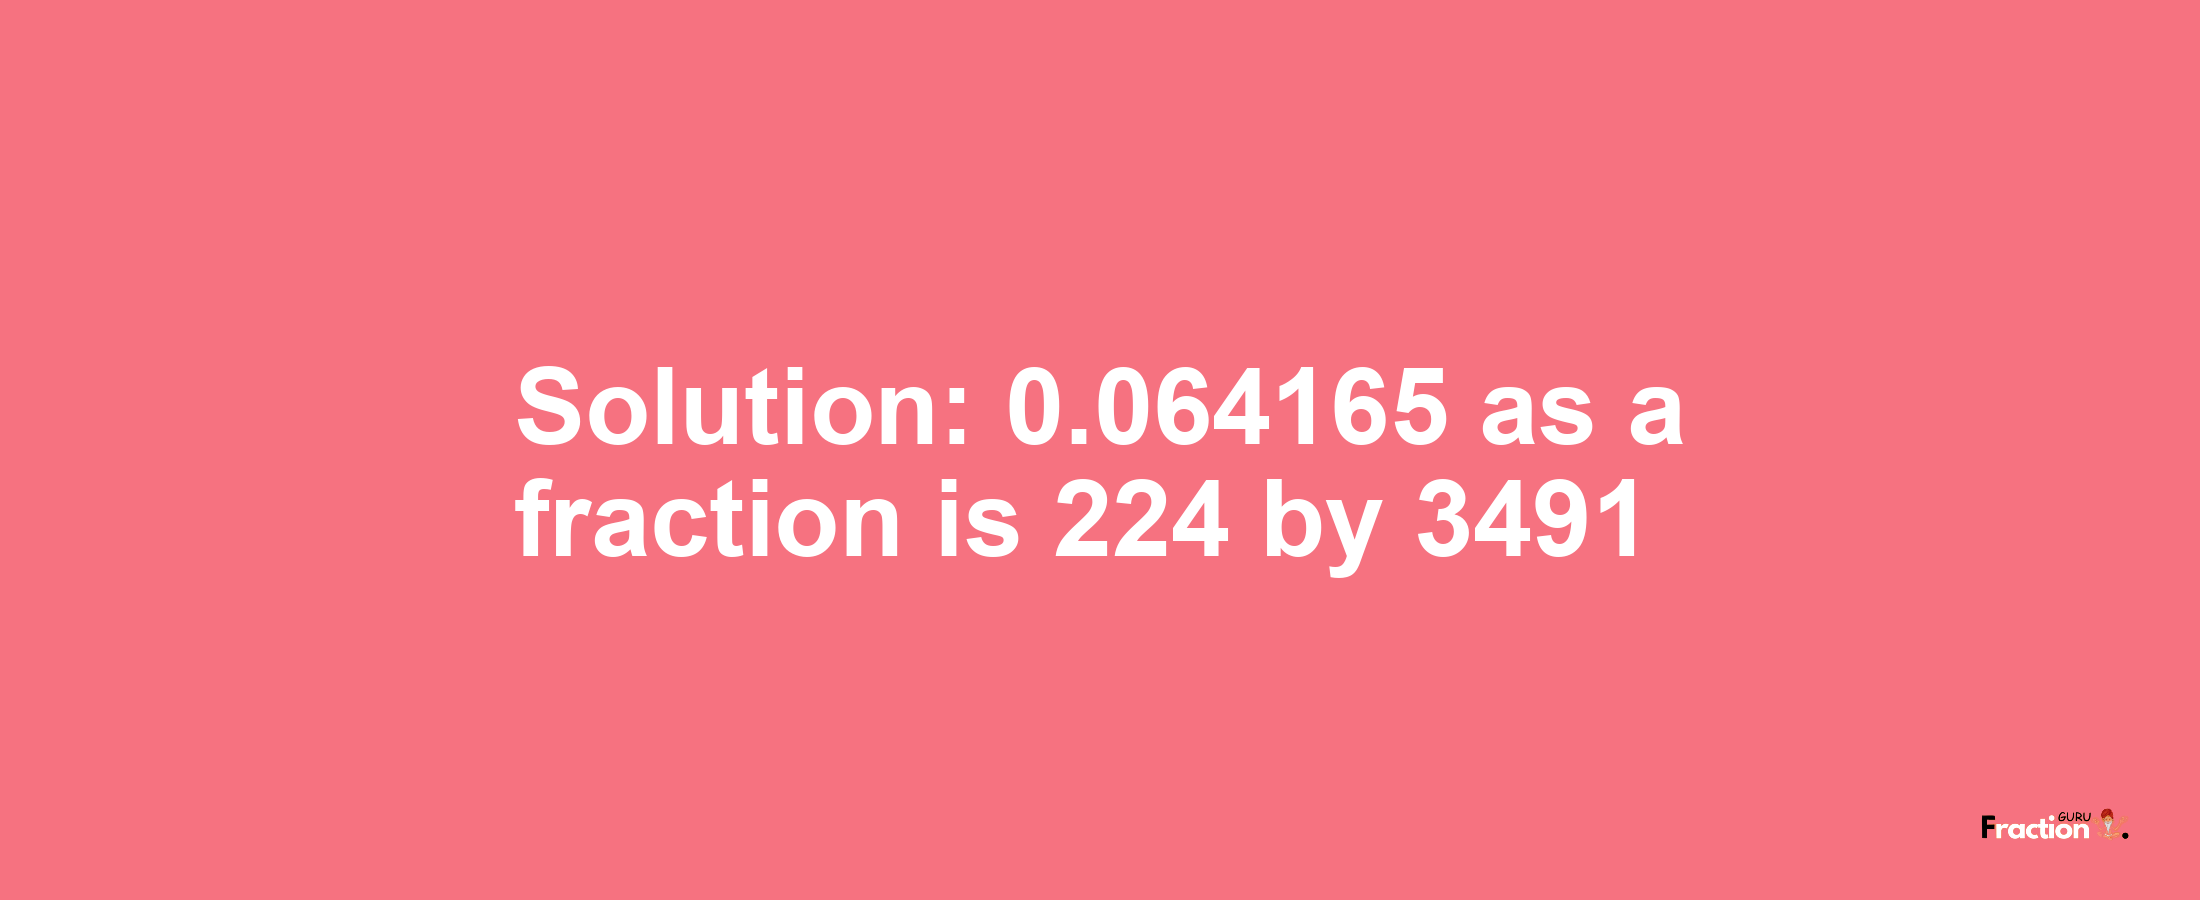 Solution:0.064165 as a fraction is 224/3491